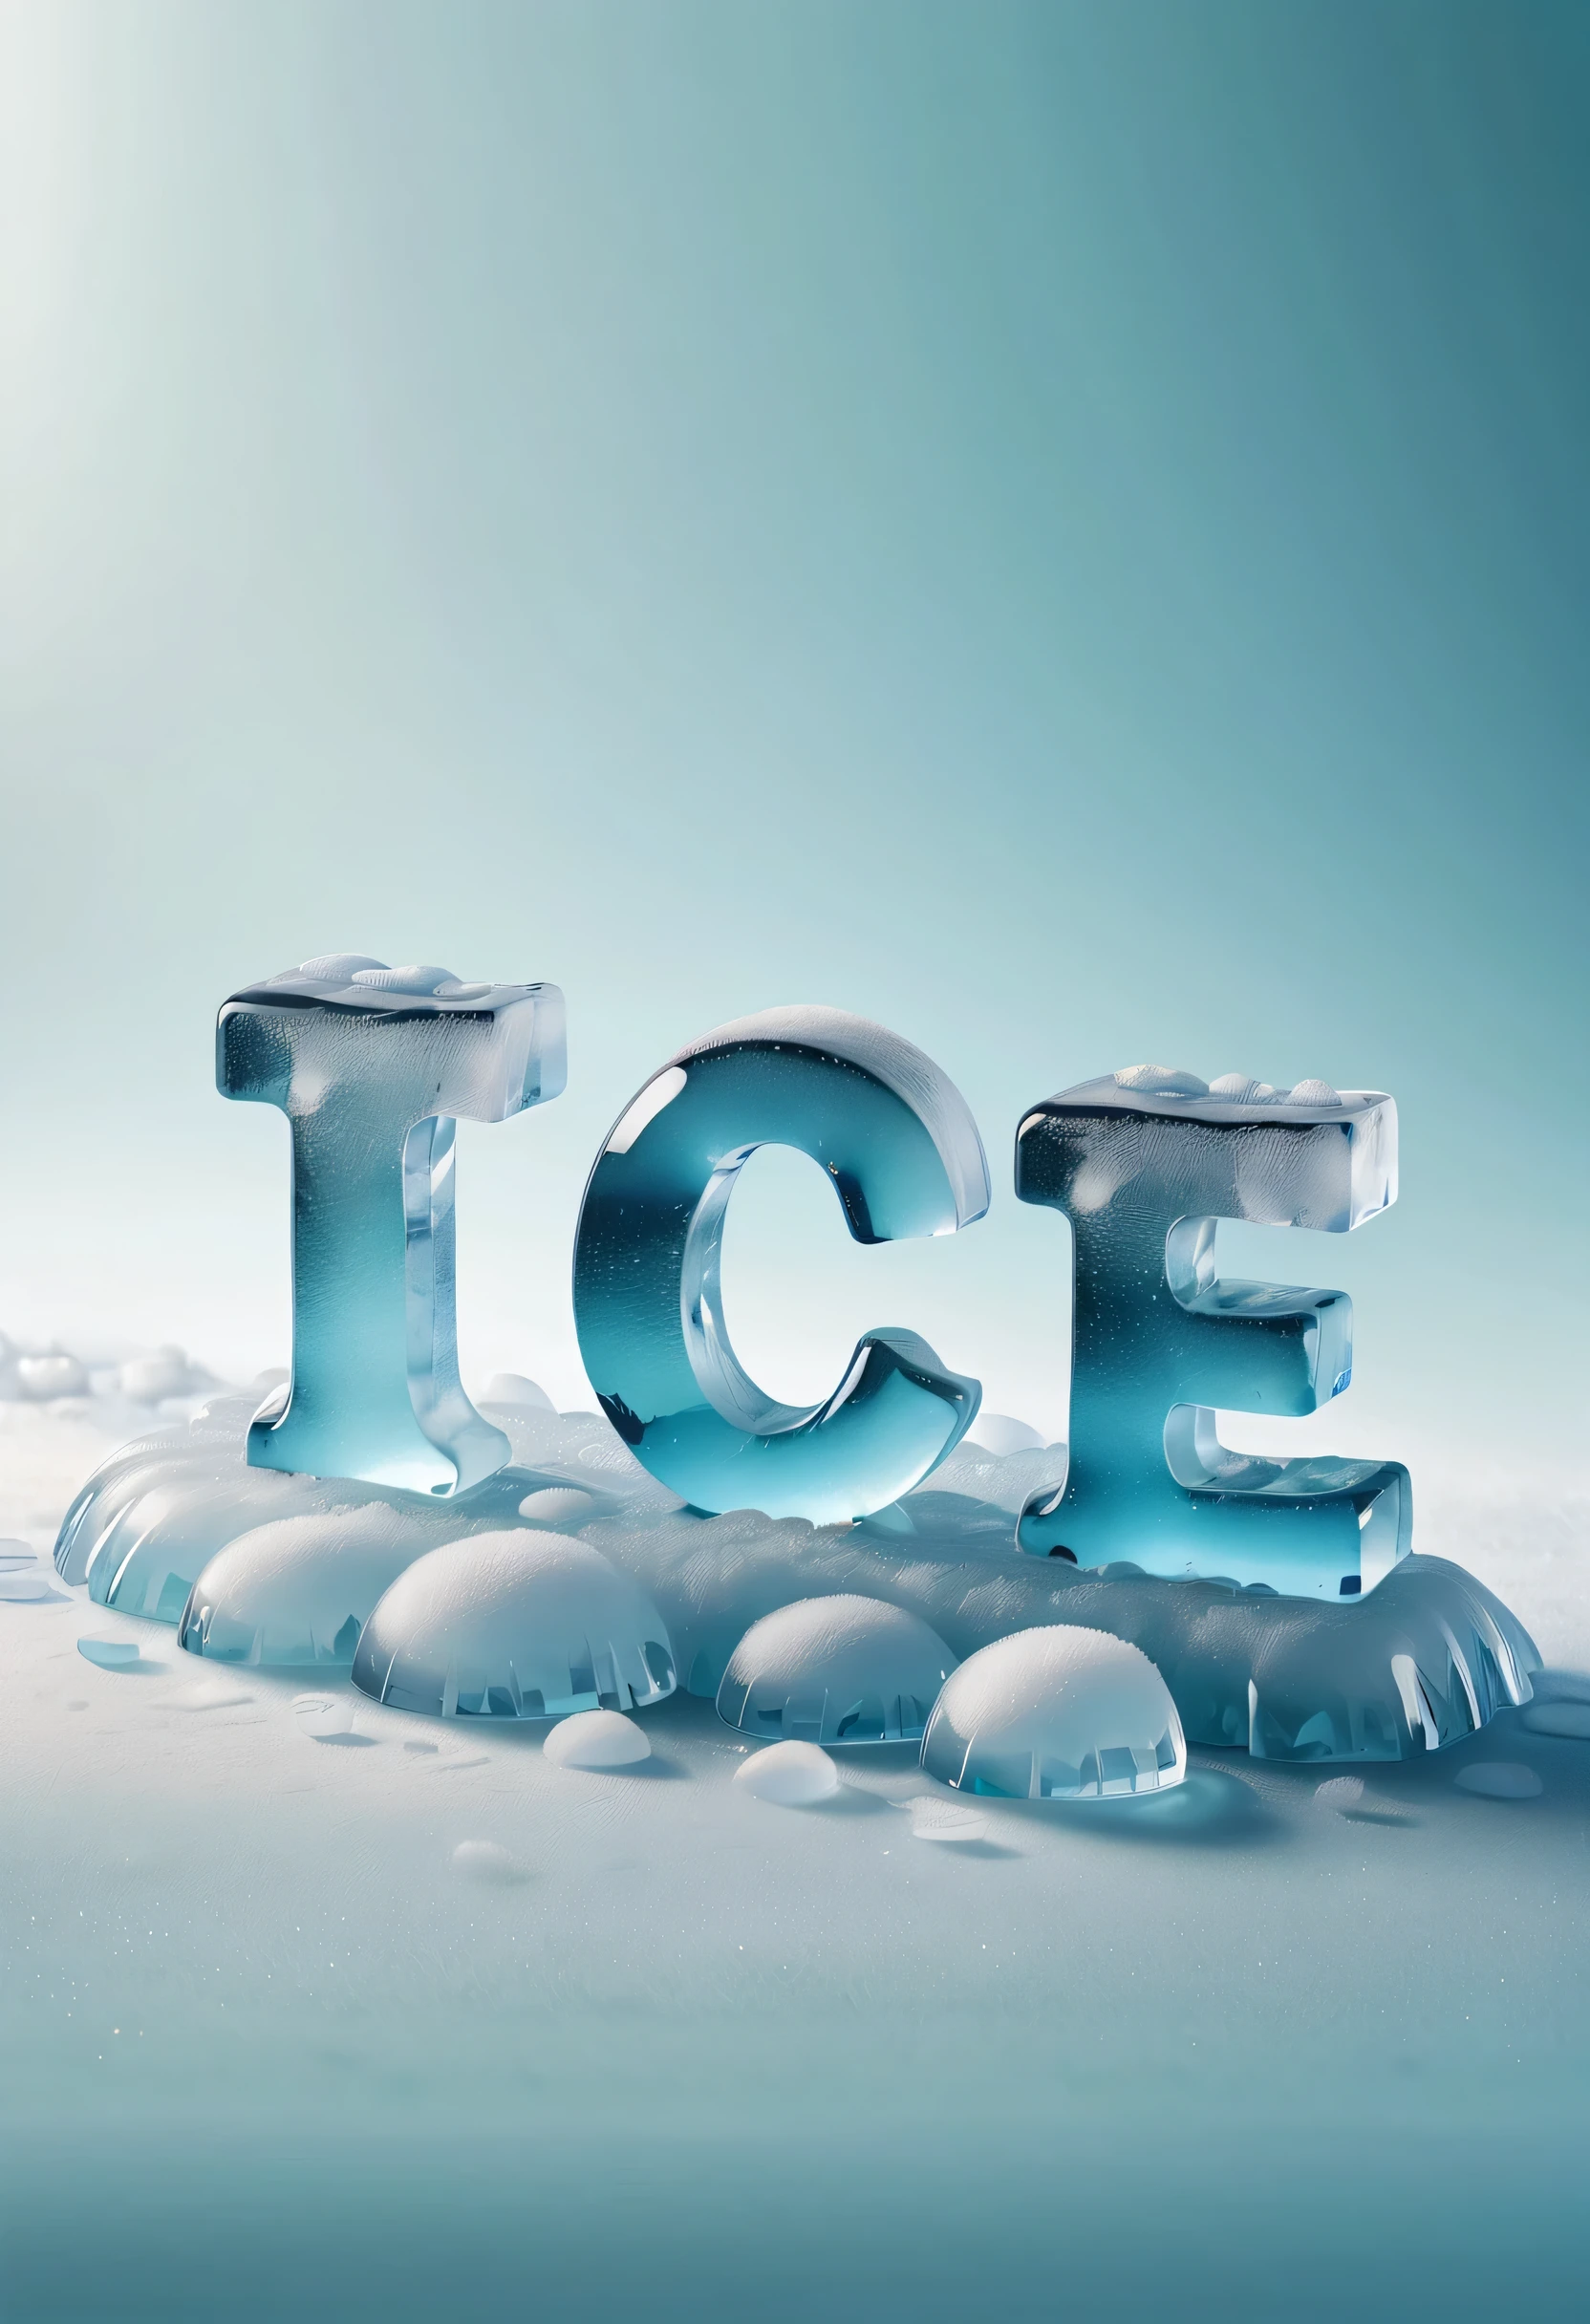 (best quality,4K,8k,high resolution,masterpiece:1.2),Super detailed,(actual,photoactual,photo-actual:1.37),Creative font design,icy texture,crystal ice,snow,cold,snowflakes,crack,summer,Delicious fruits,Detailed ice texture,dark background,sparkling texture,frozen mail,flashing icy patterns,refreshing colour,Fruit slices in the sun,Juicy grapes,Chilled watermelon slices,Cool sensation,Juxtaposition of warm and cool colors,Vibrant red strawberries,water drops on fruit,Letter fragments in ice cubes,snow-covered branches,translucent ice shards,crystal clear font,Cool blue tones,Cold format engraving.3D